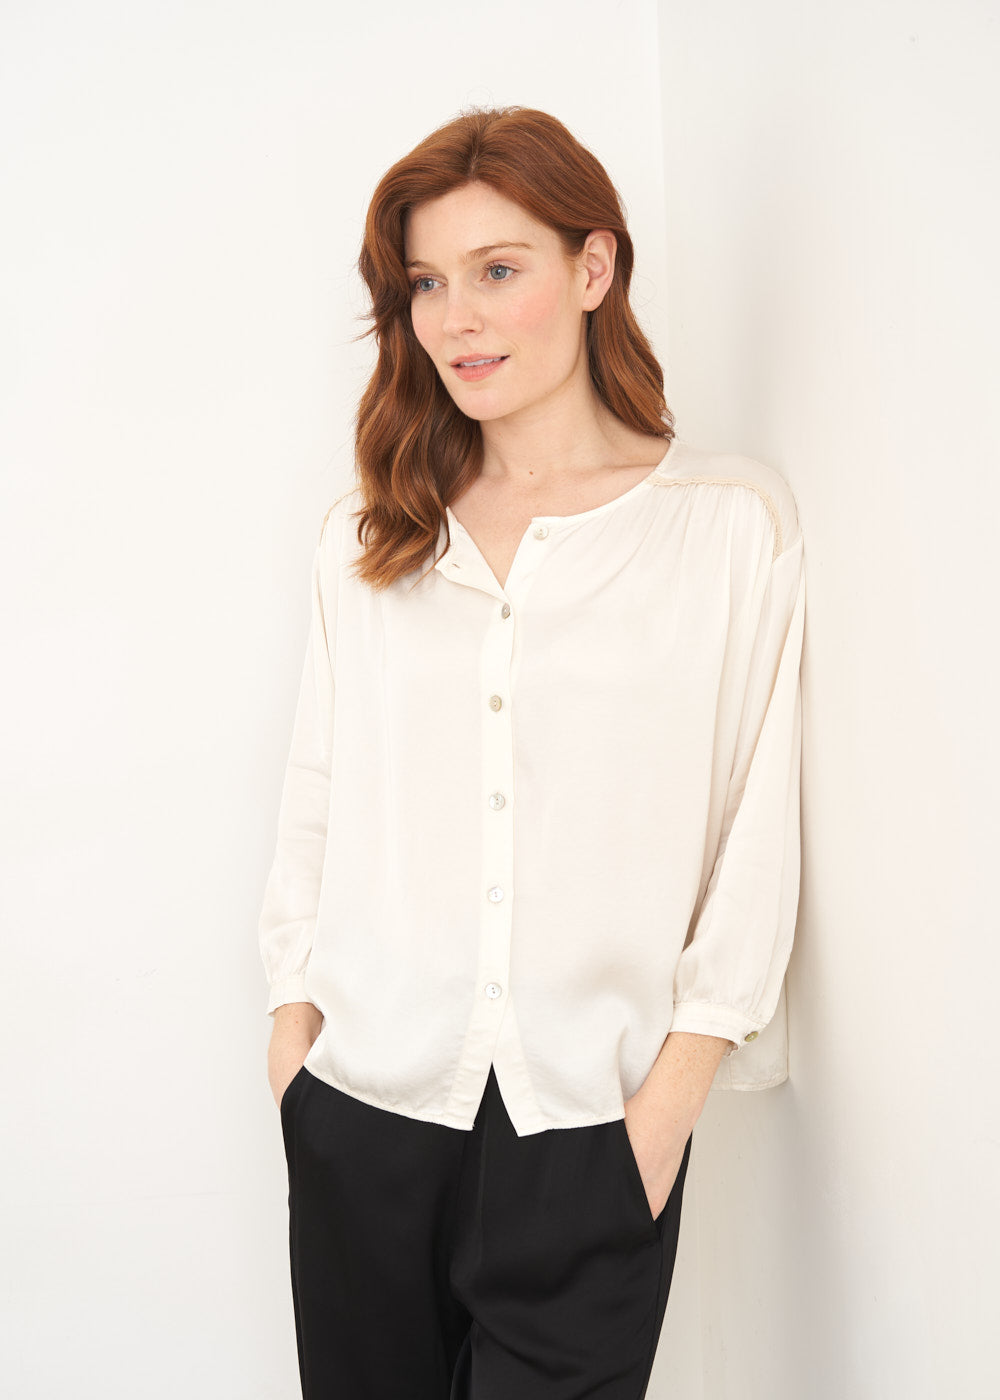 An Independent Women's Clothing Brand – BUSBY & FOX